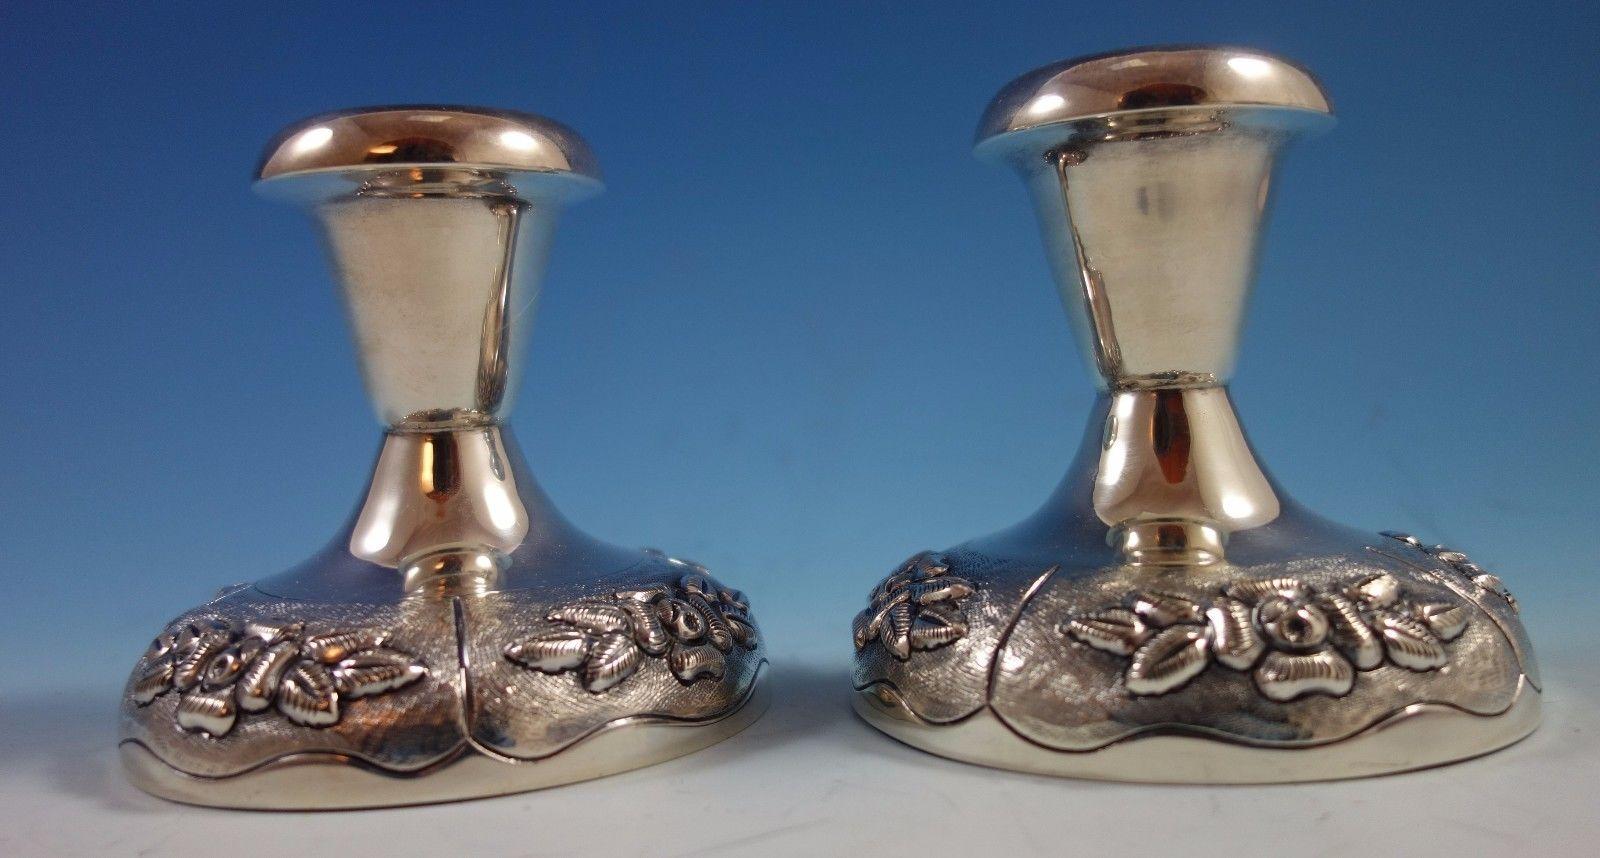 Aztec Rose by Maciel Mexican Sterling Silver Candlestick Pair #8/1347 1